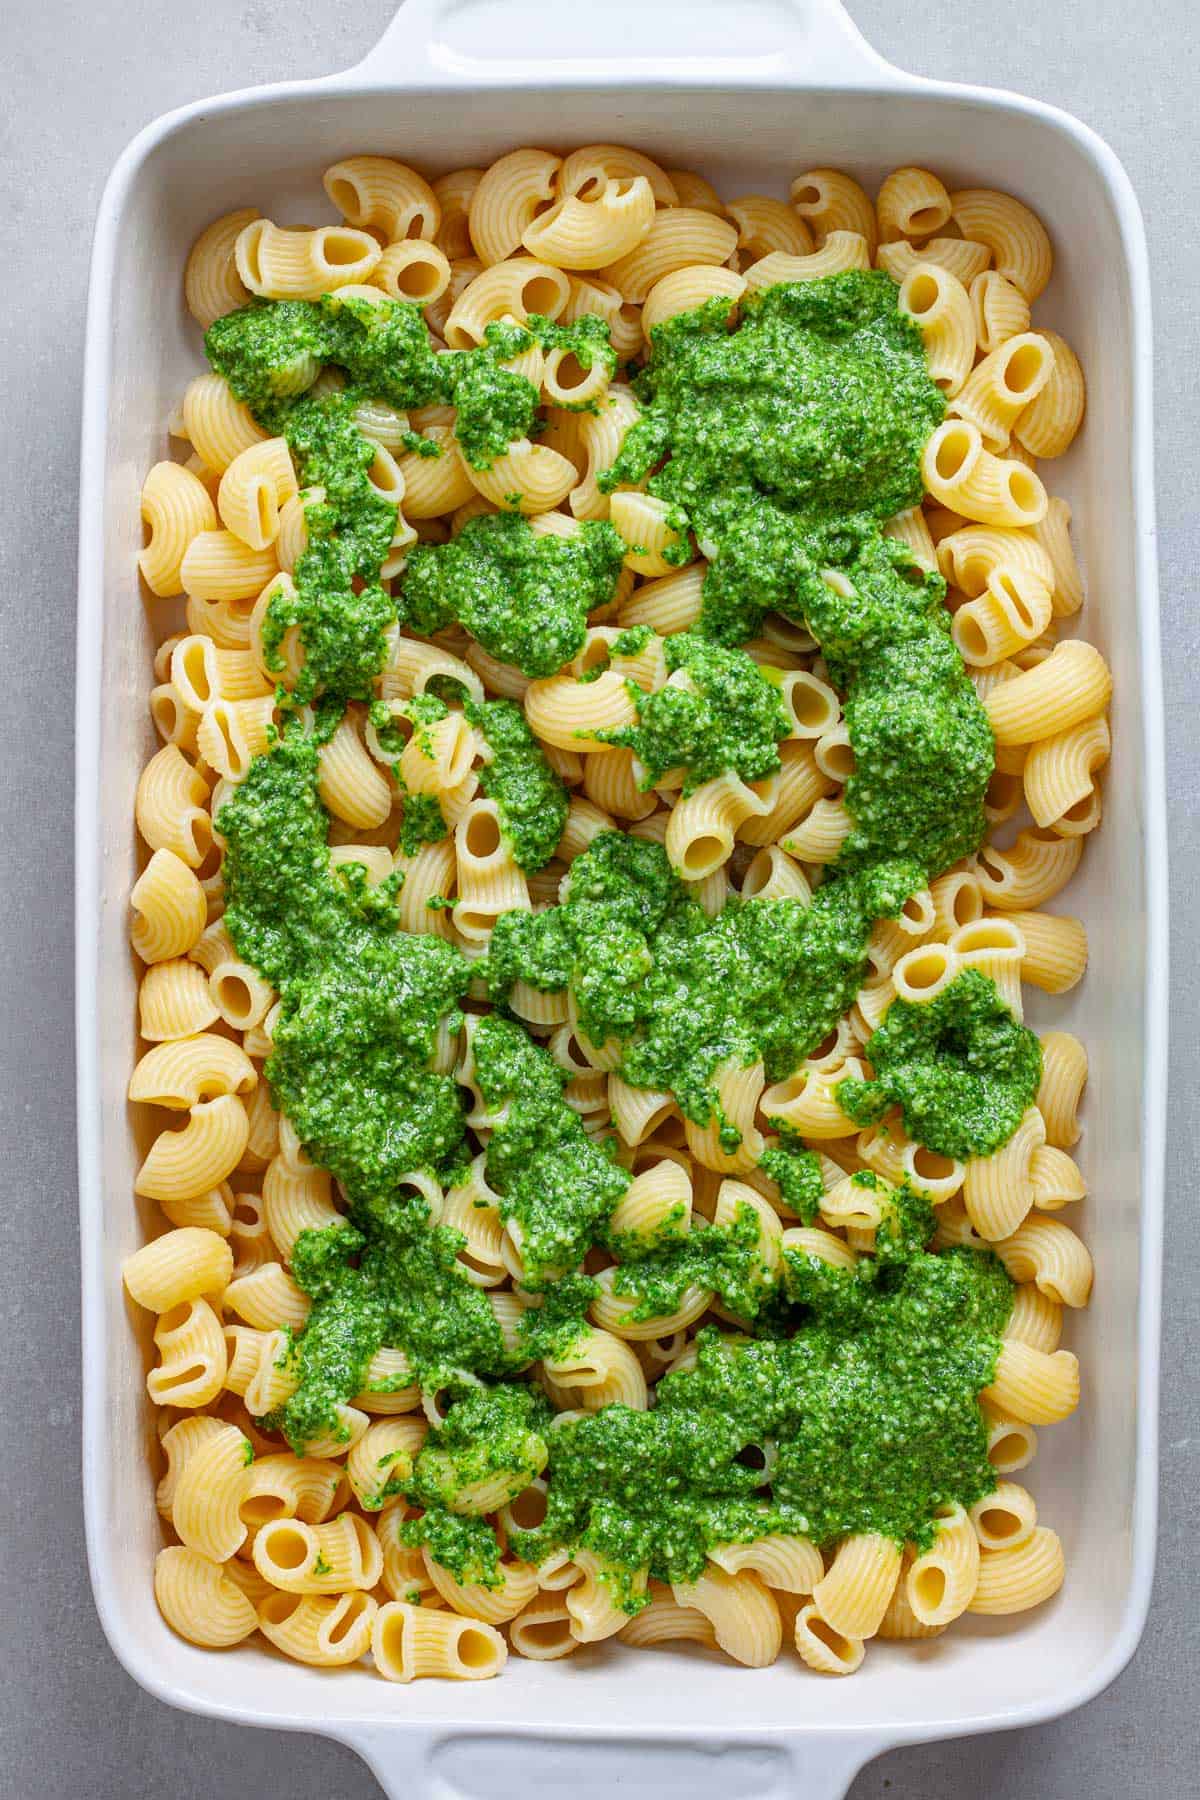 A casserole dish of cooked pasta with pesto spooned on top.